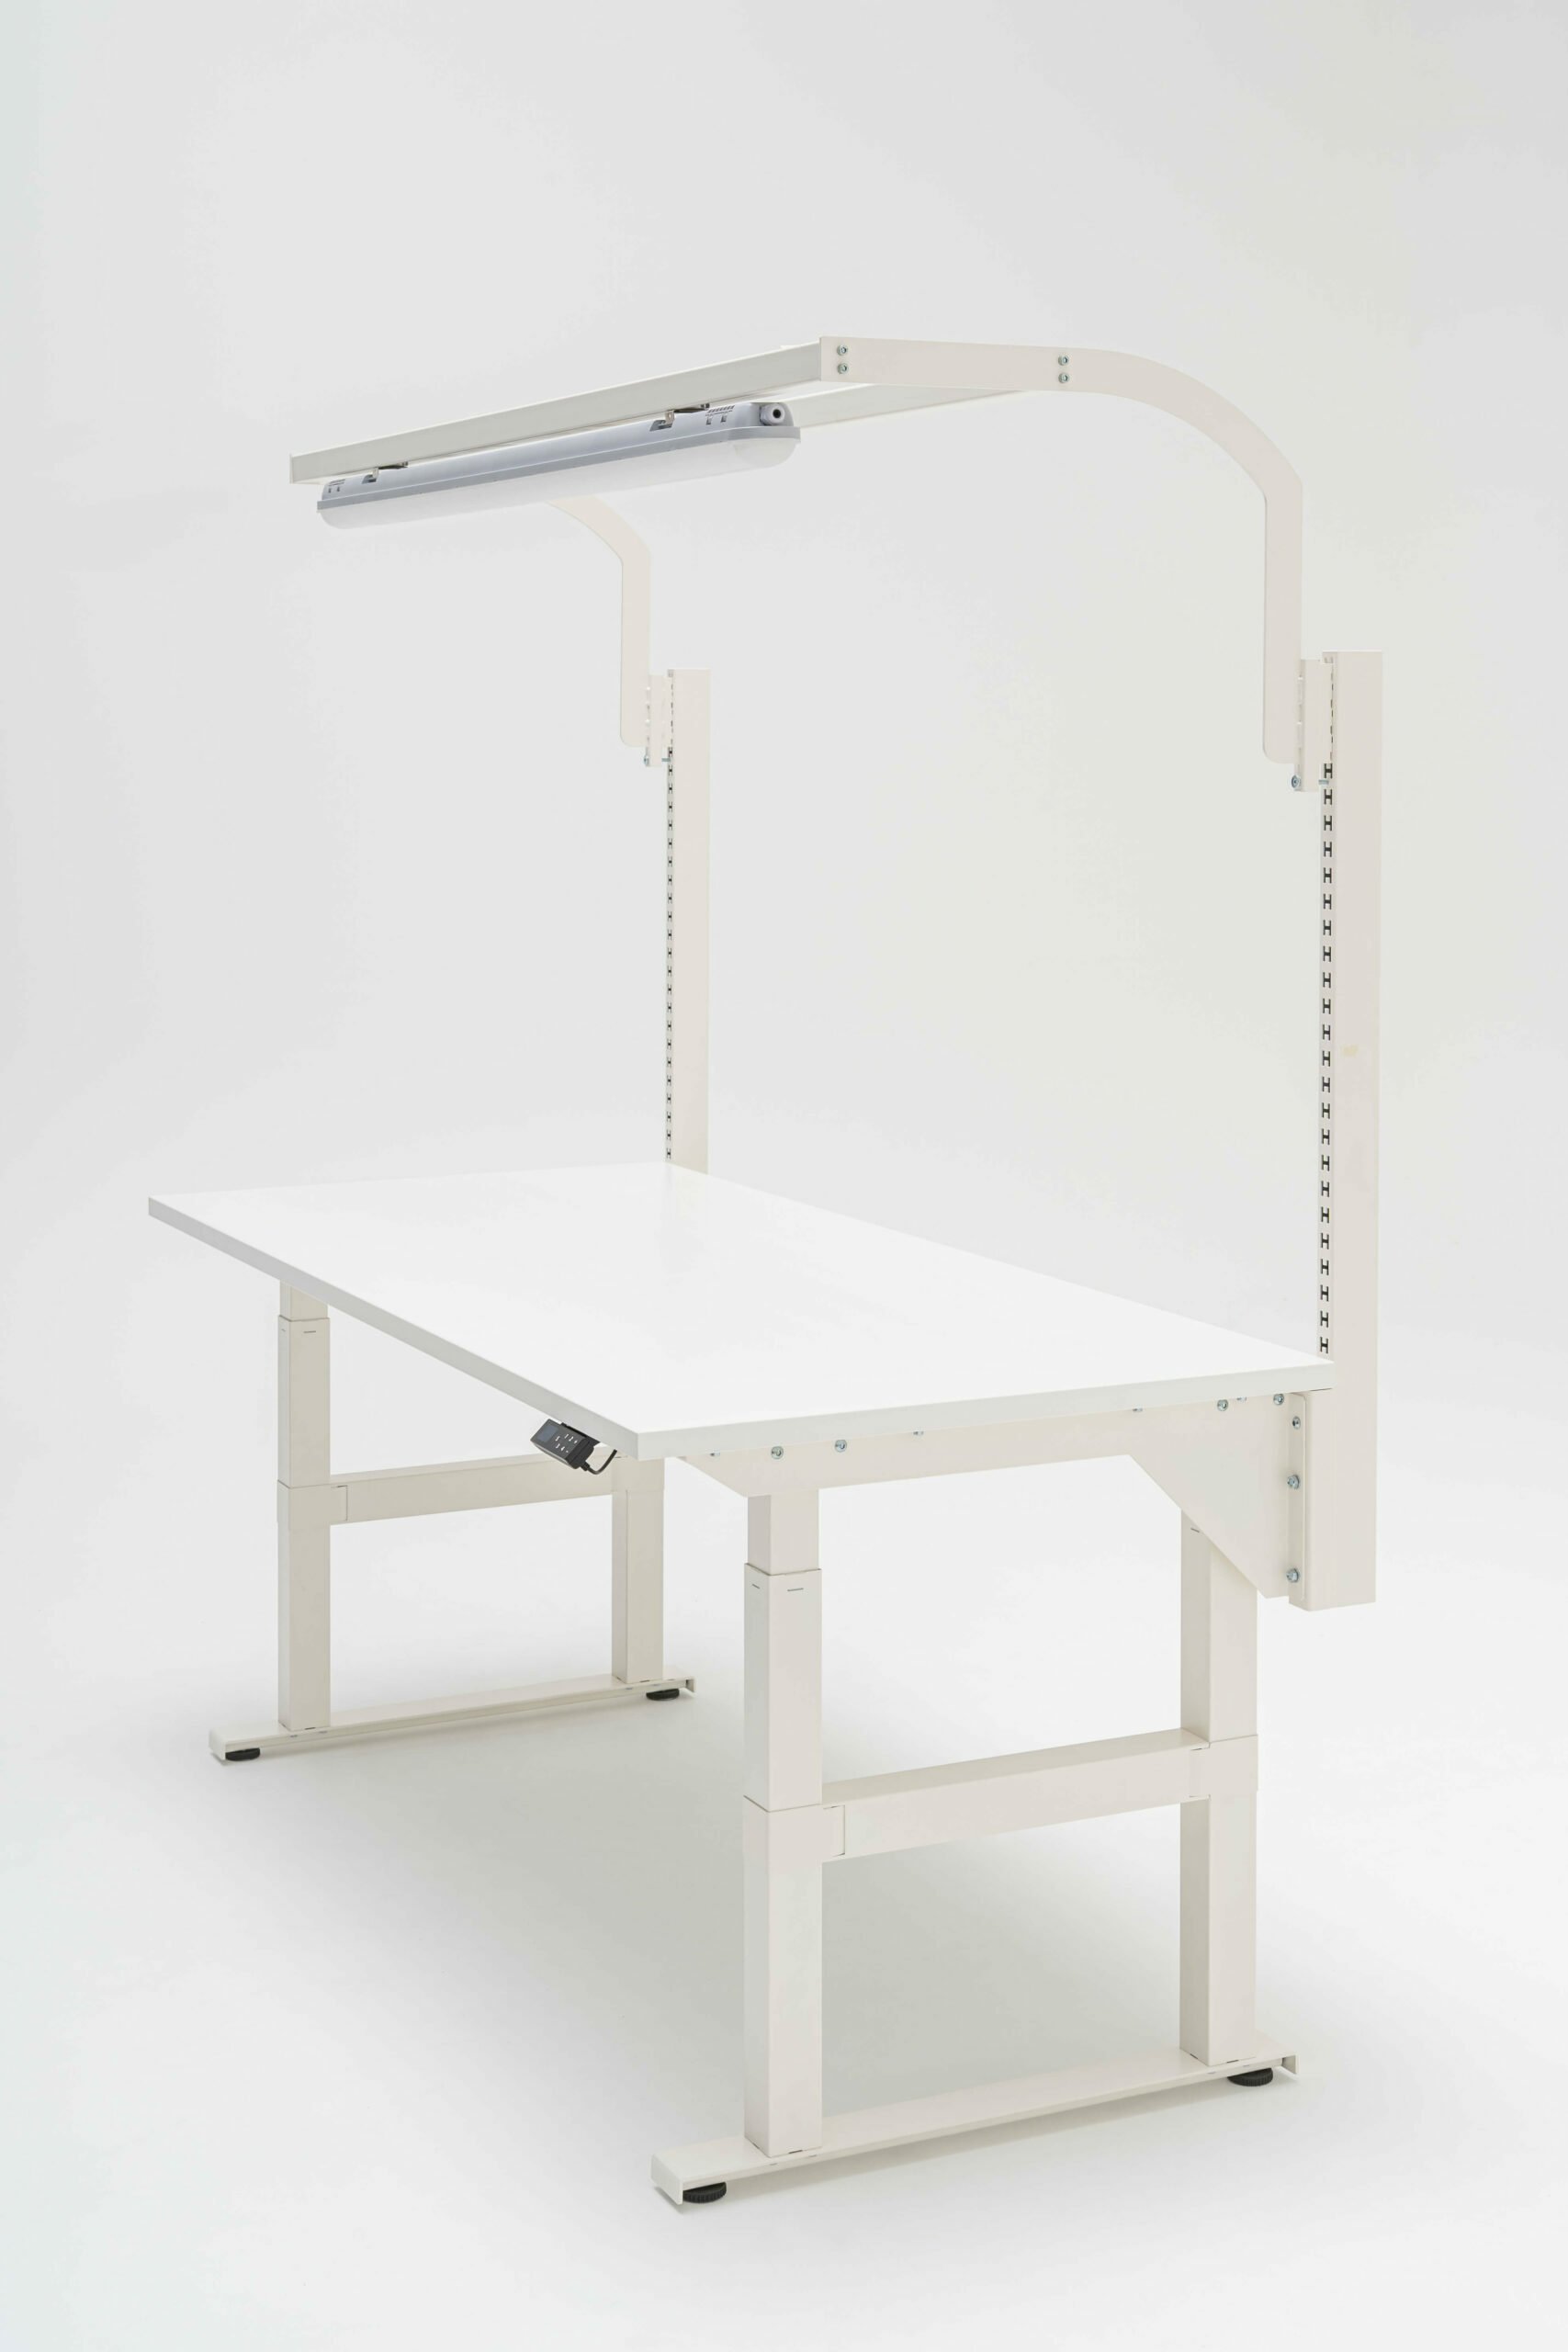 Packing table with lighting module